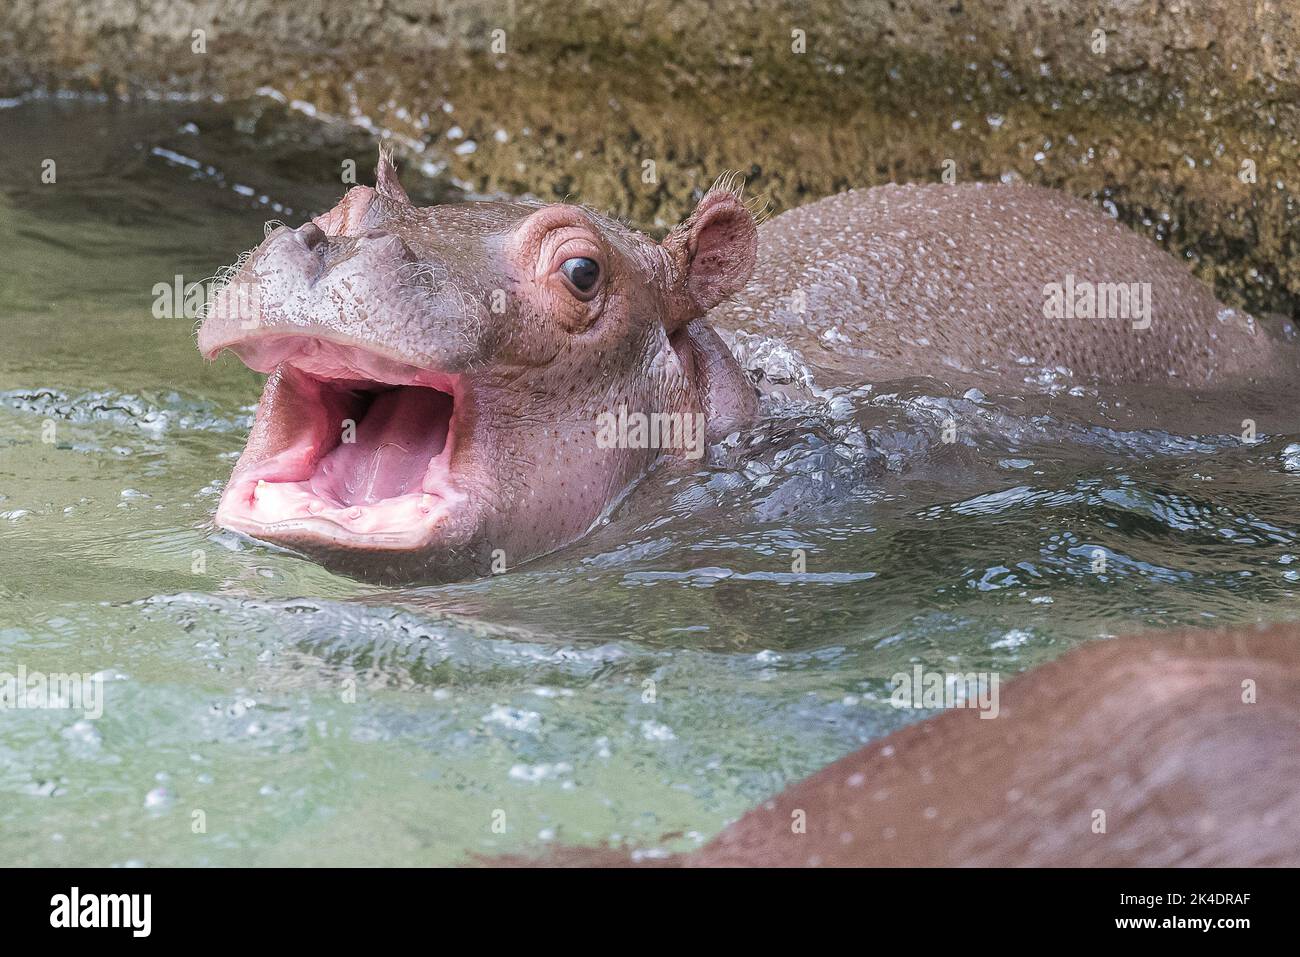 Baby hippo with open mouth in water Stock Photo